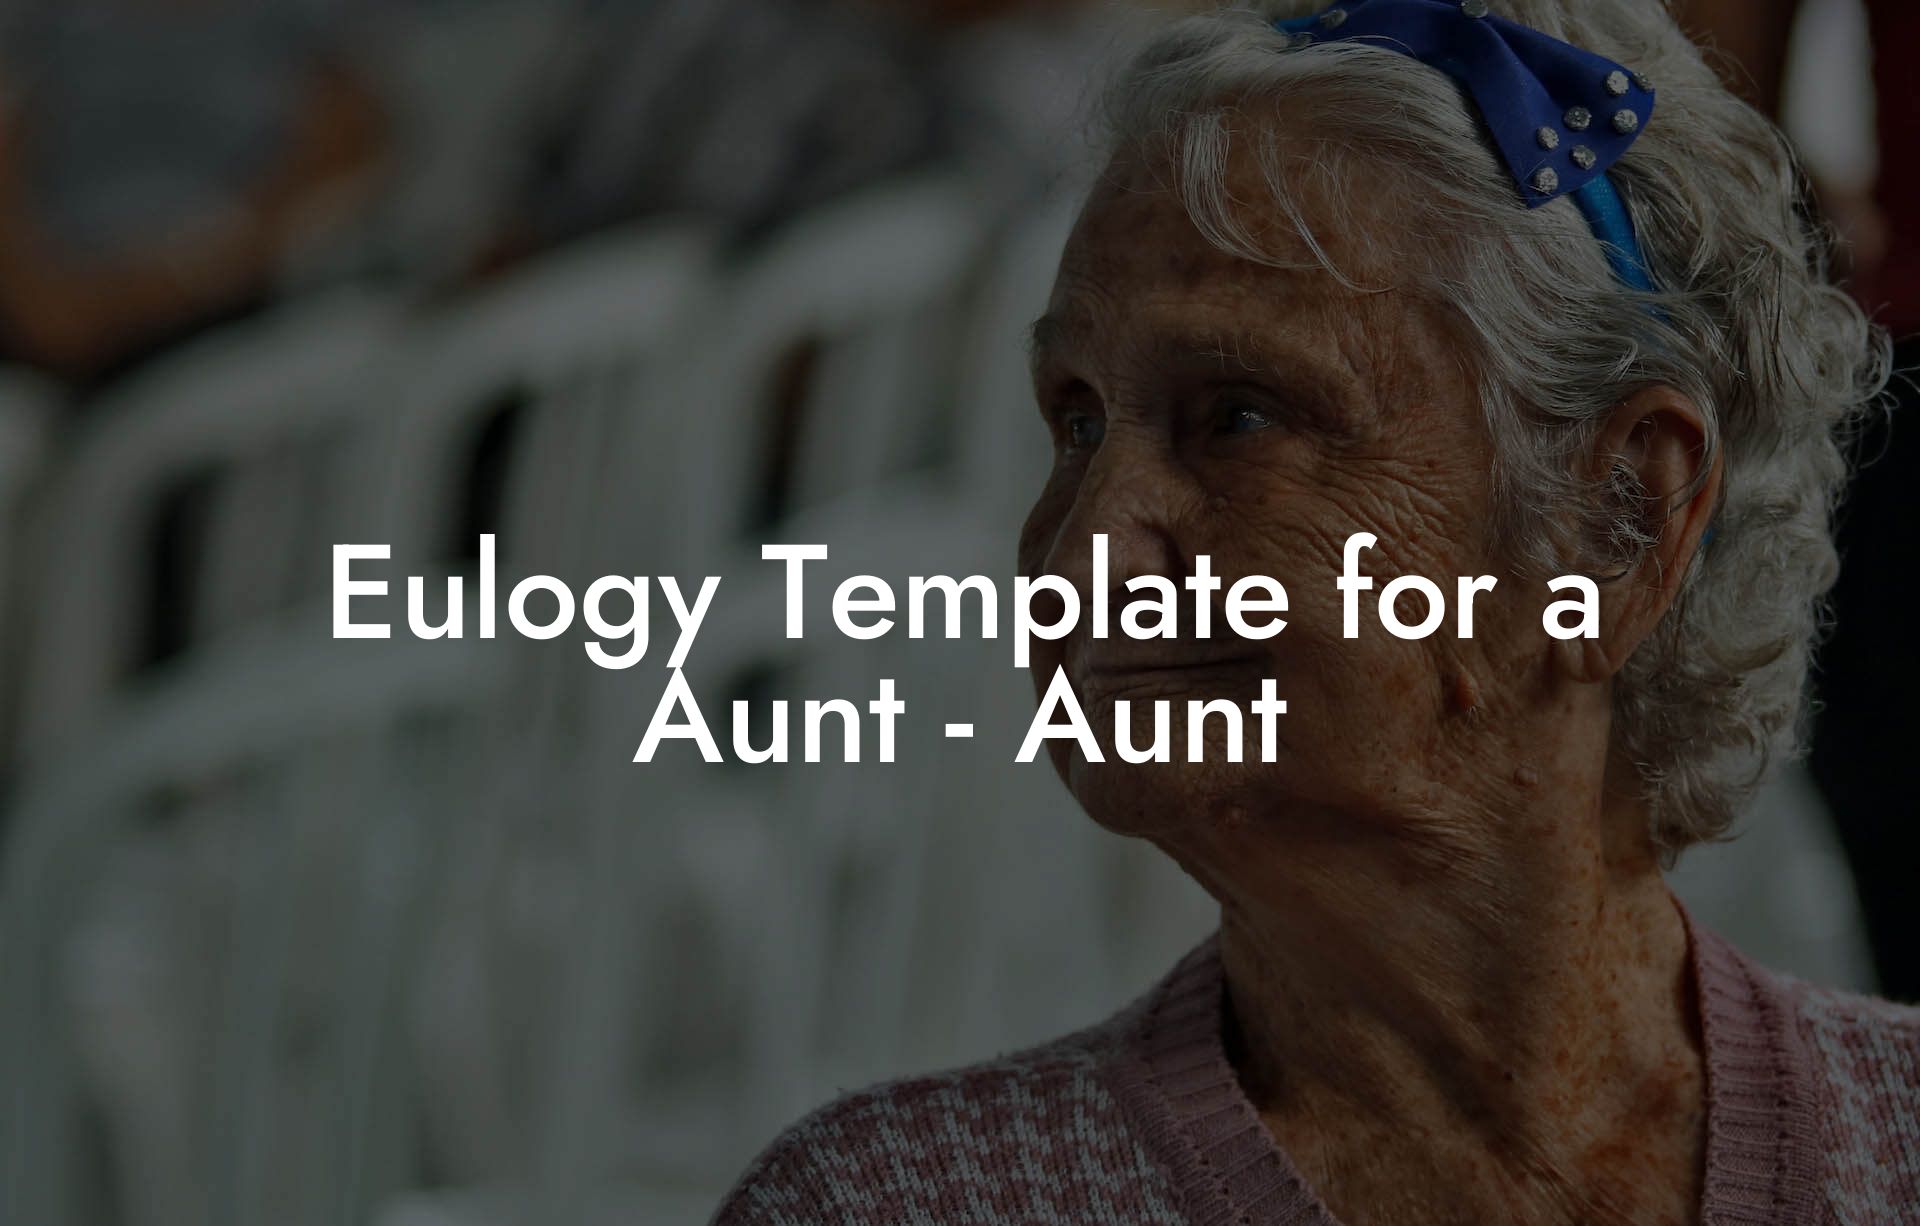 Eulogy Template for a Aunt - Aunt